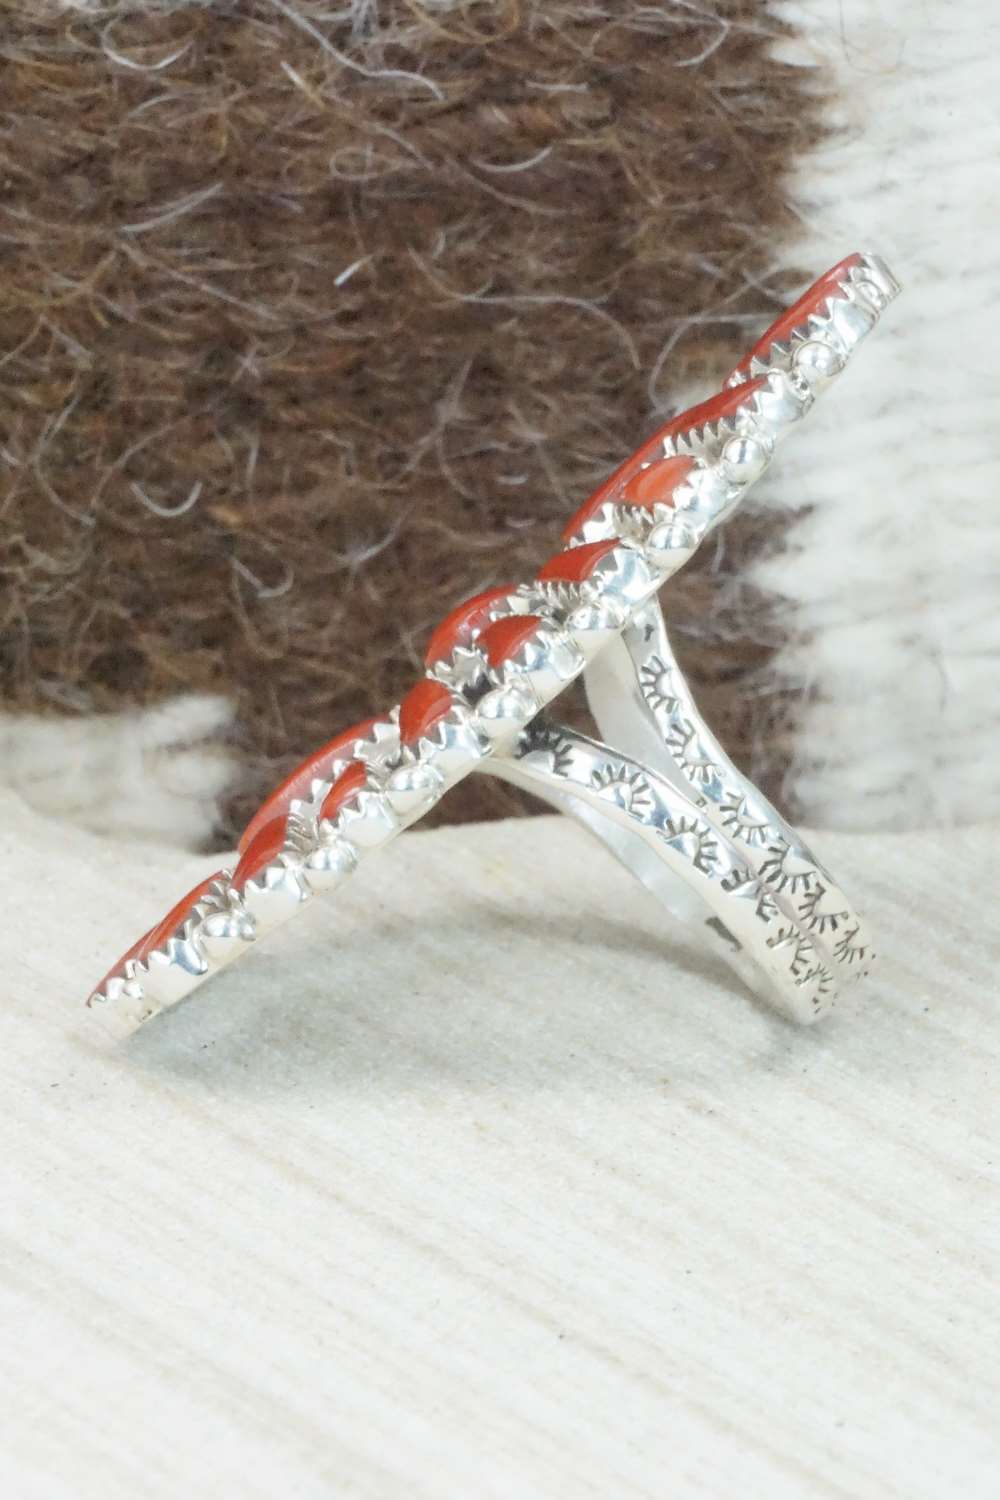 Coral and Sterling Silver Ring - Donovan Wilson - Size 9